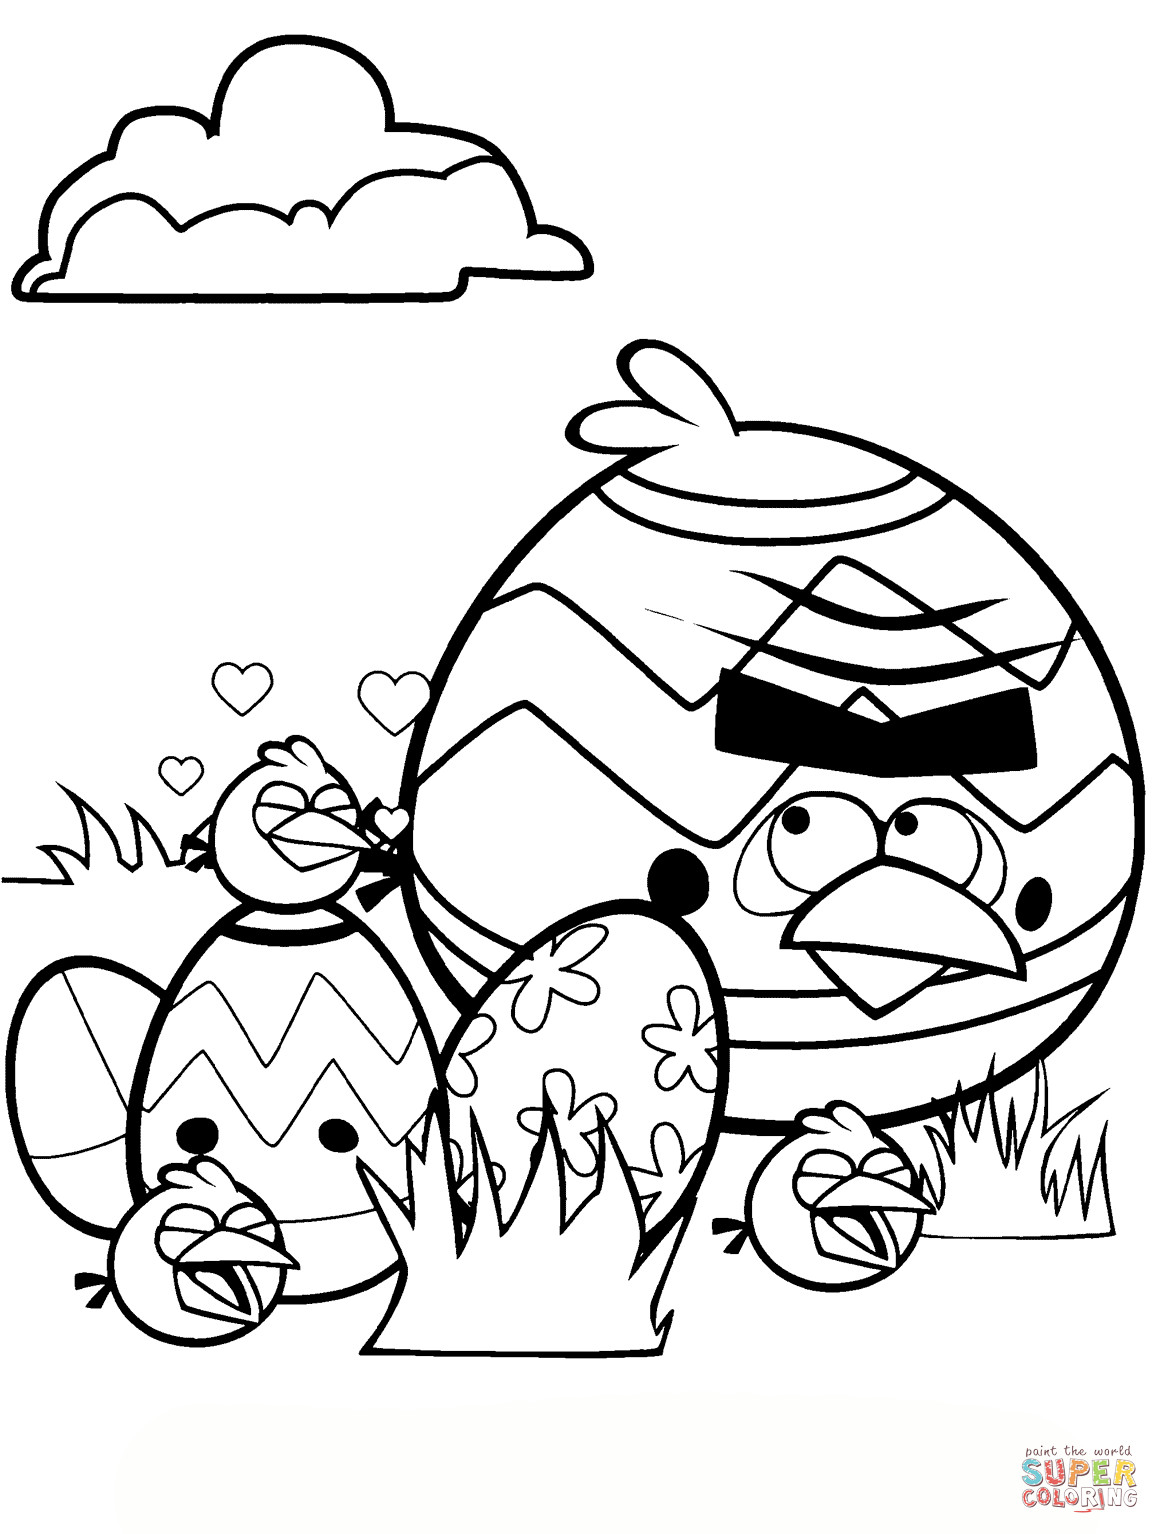 Angry Bird Printable Coloring Pages
 15 Best Printable Angry Birds Colouring Pages for Kids